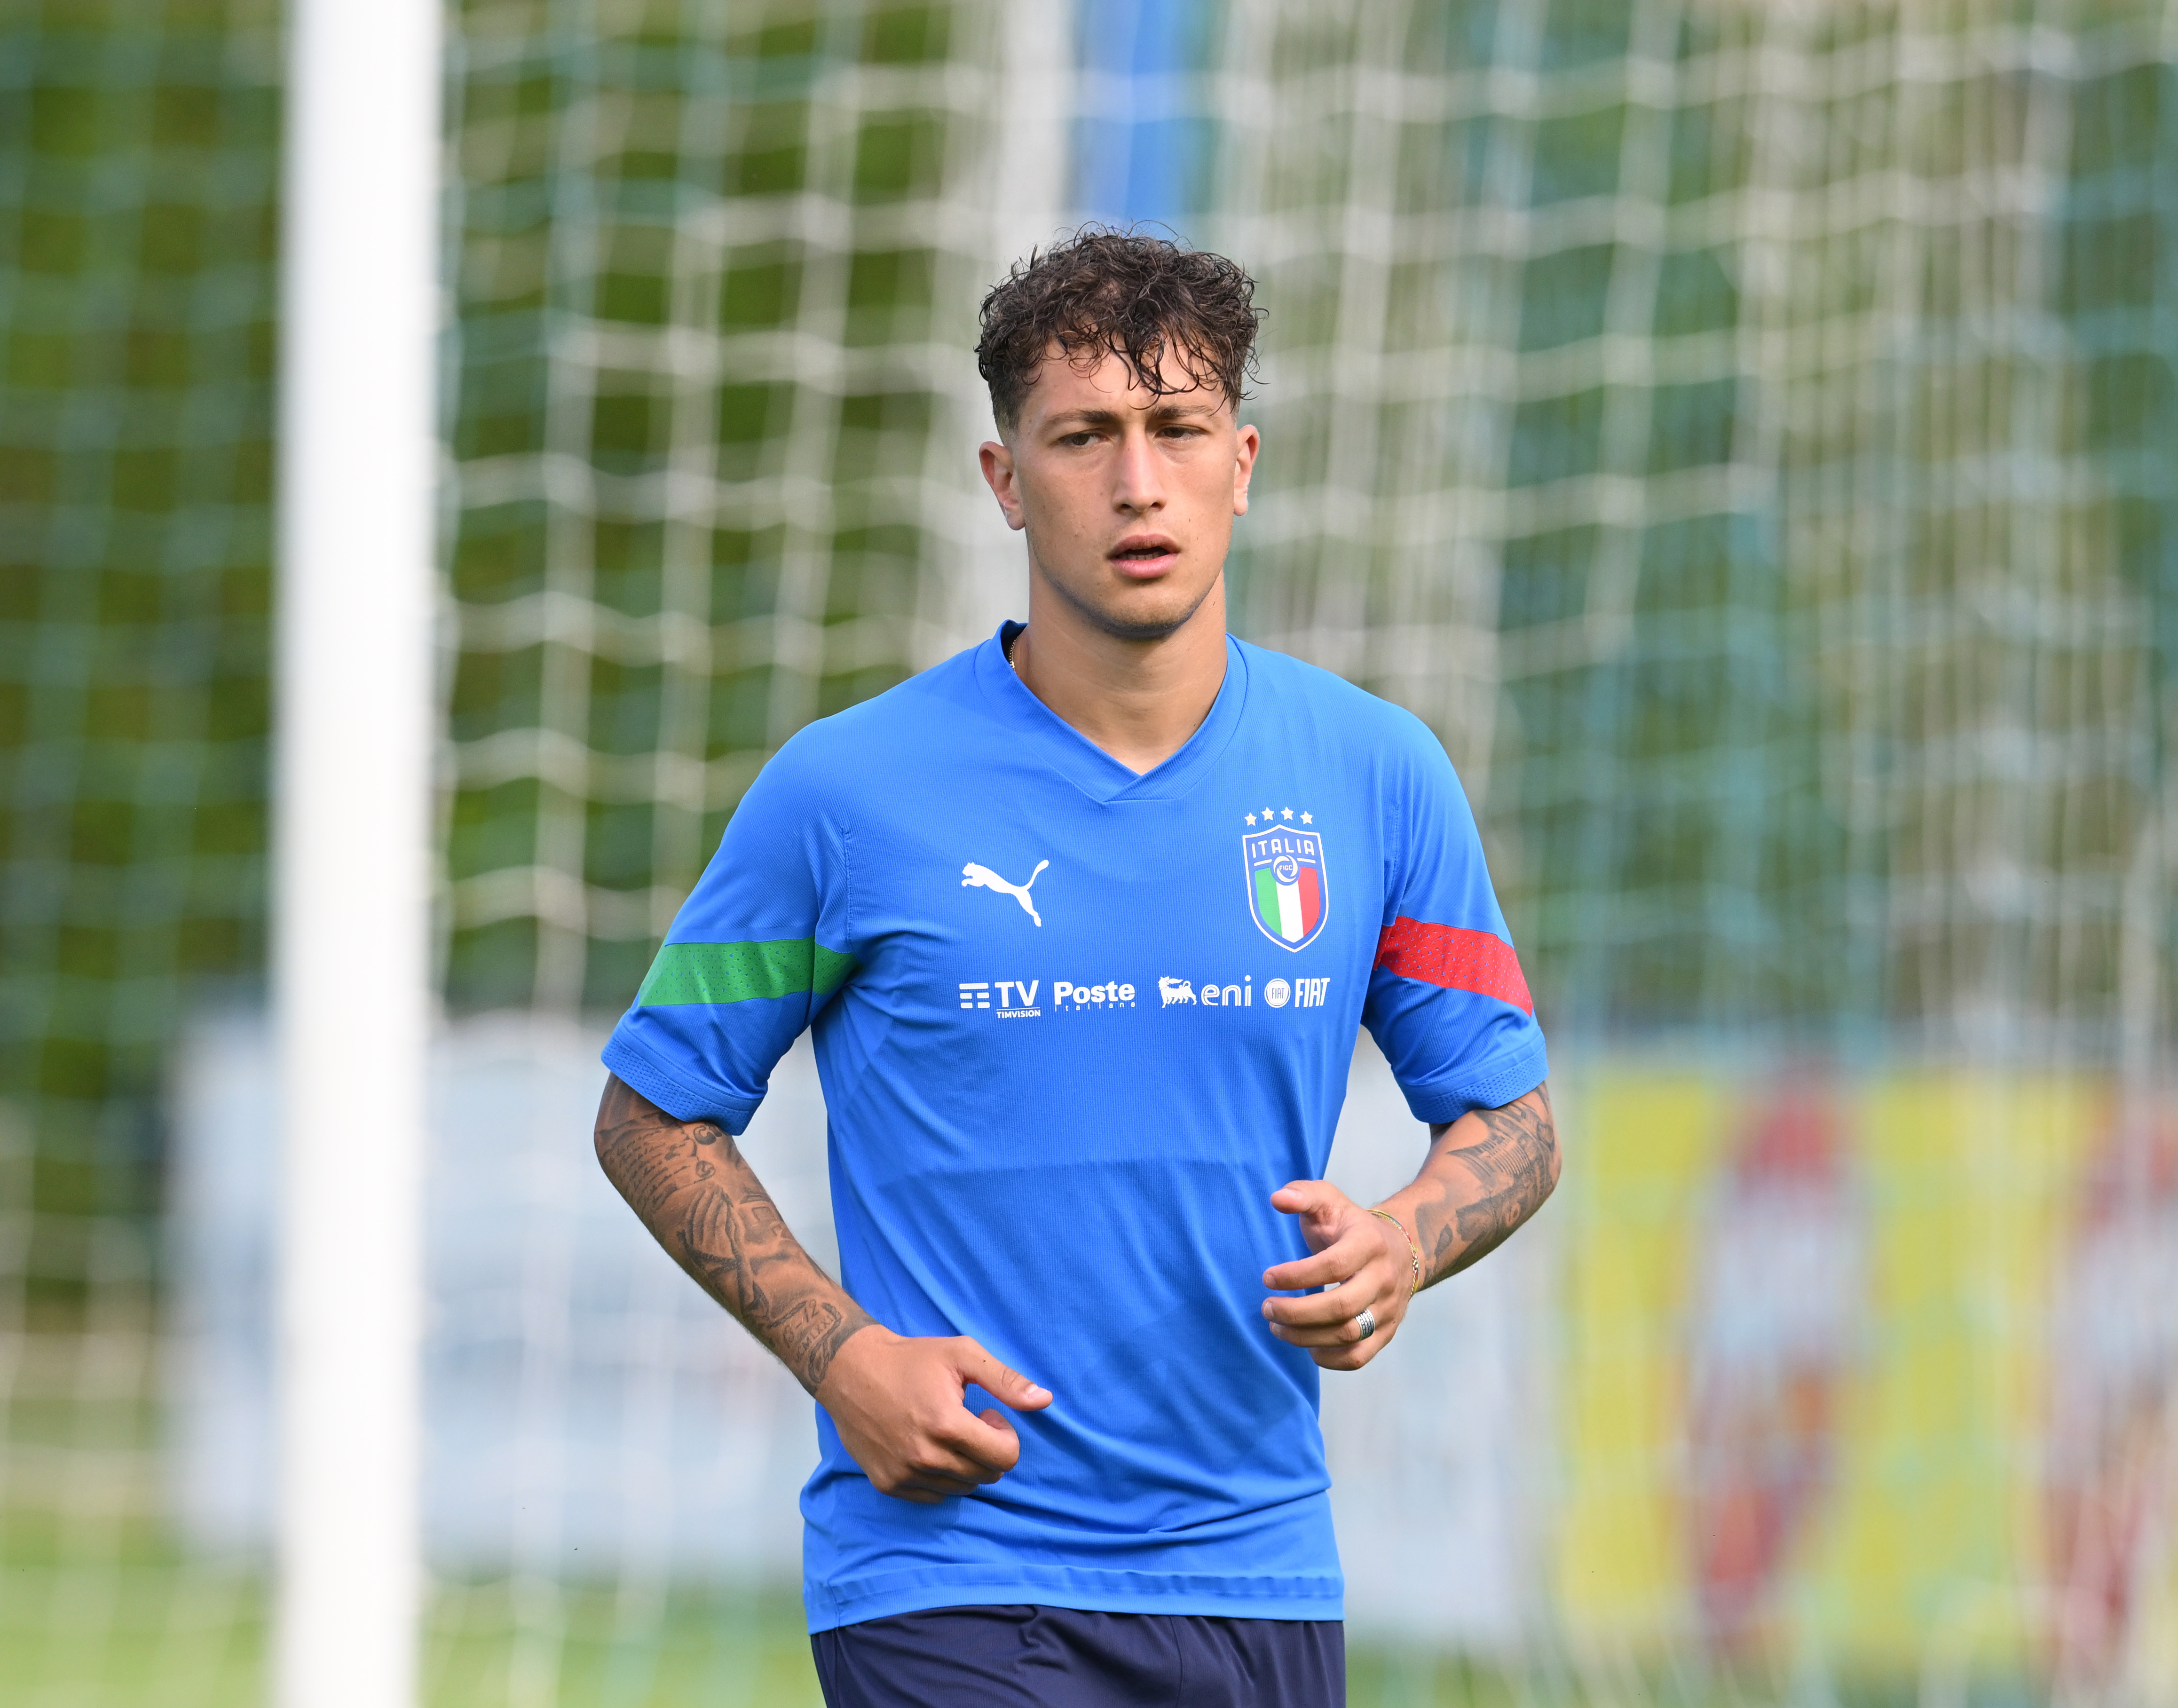 Esposito and his love for the Italy shirt: “It's the best jersey